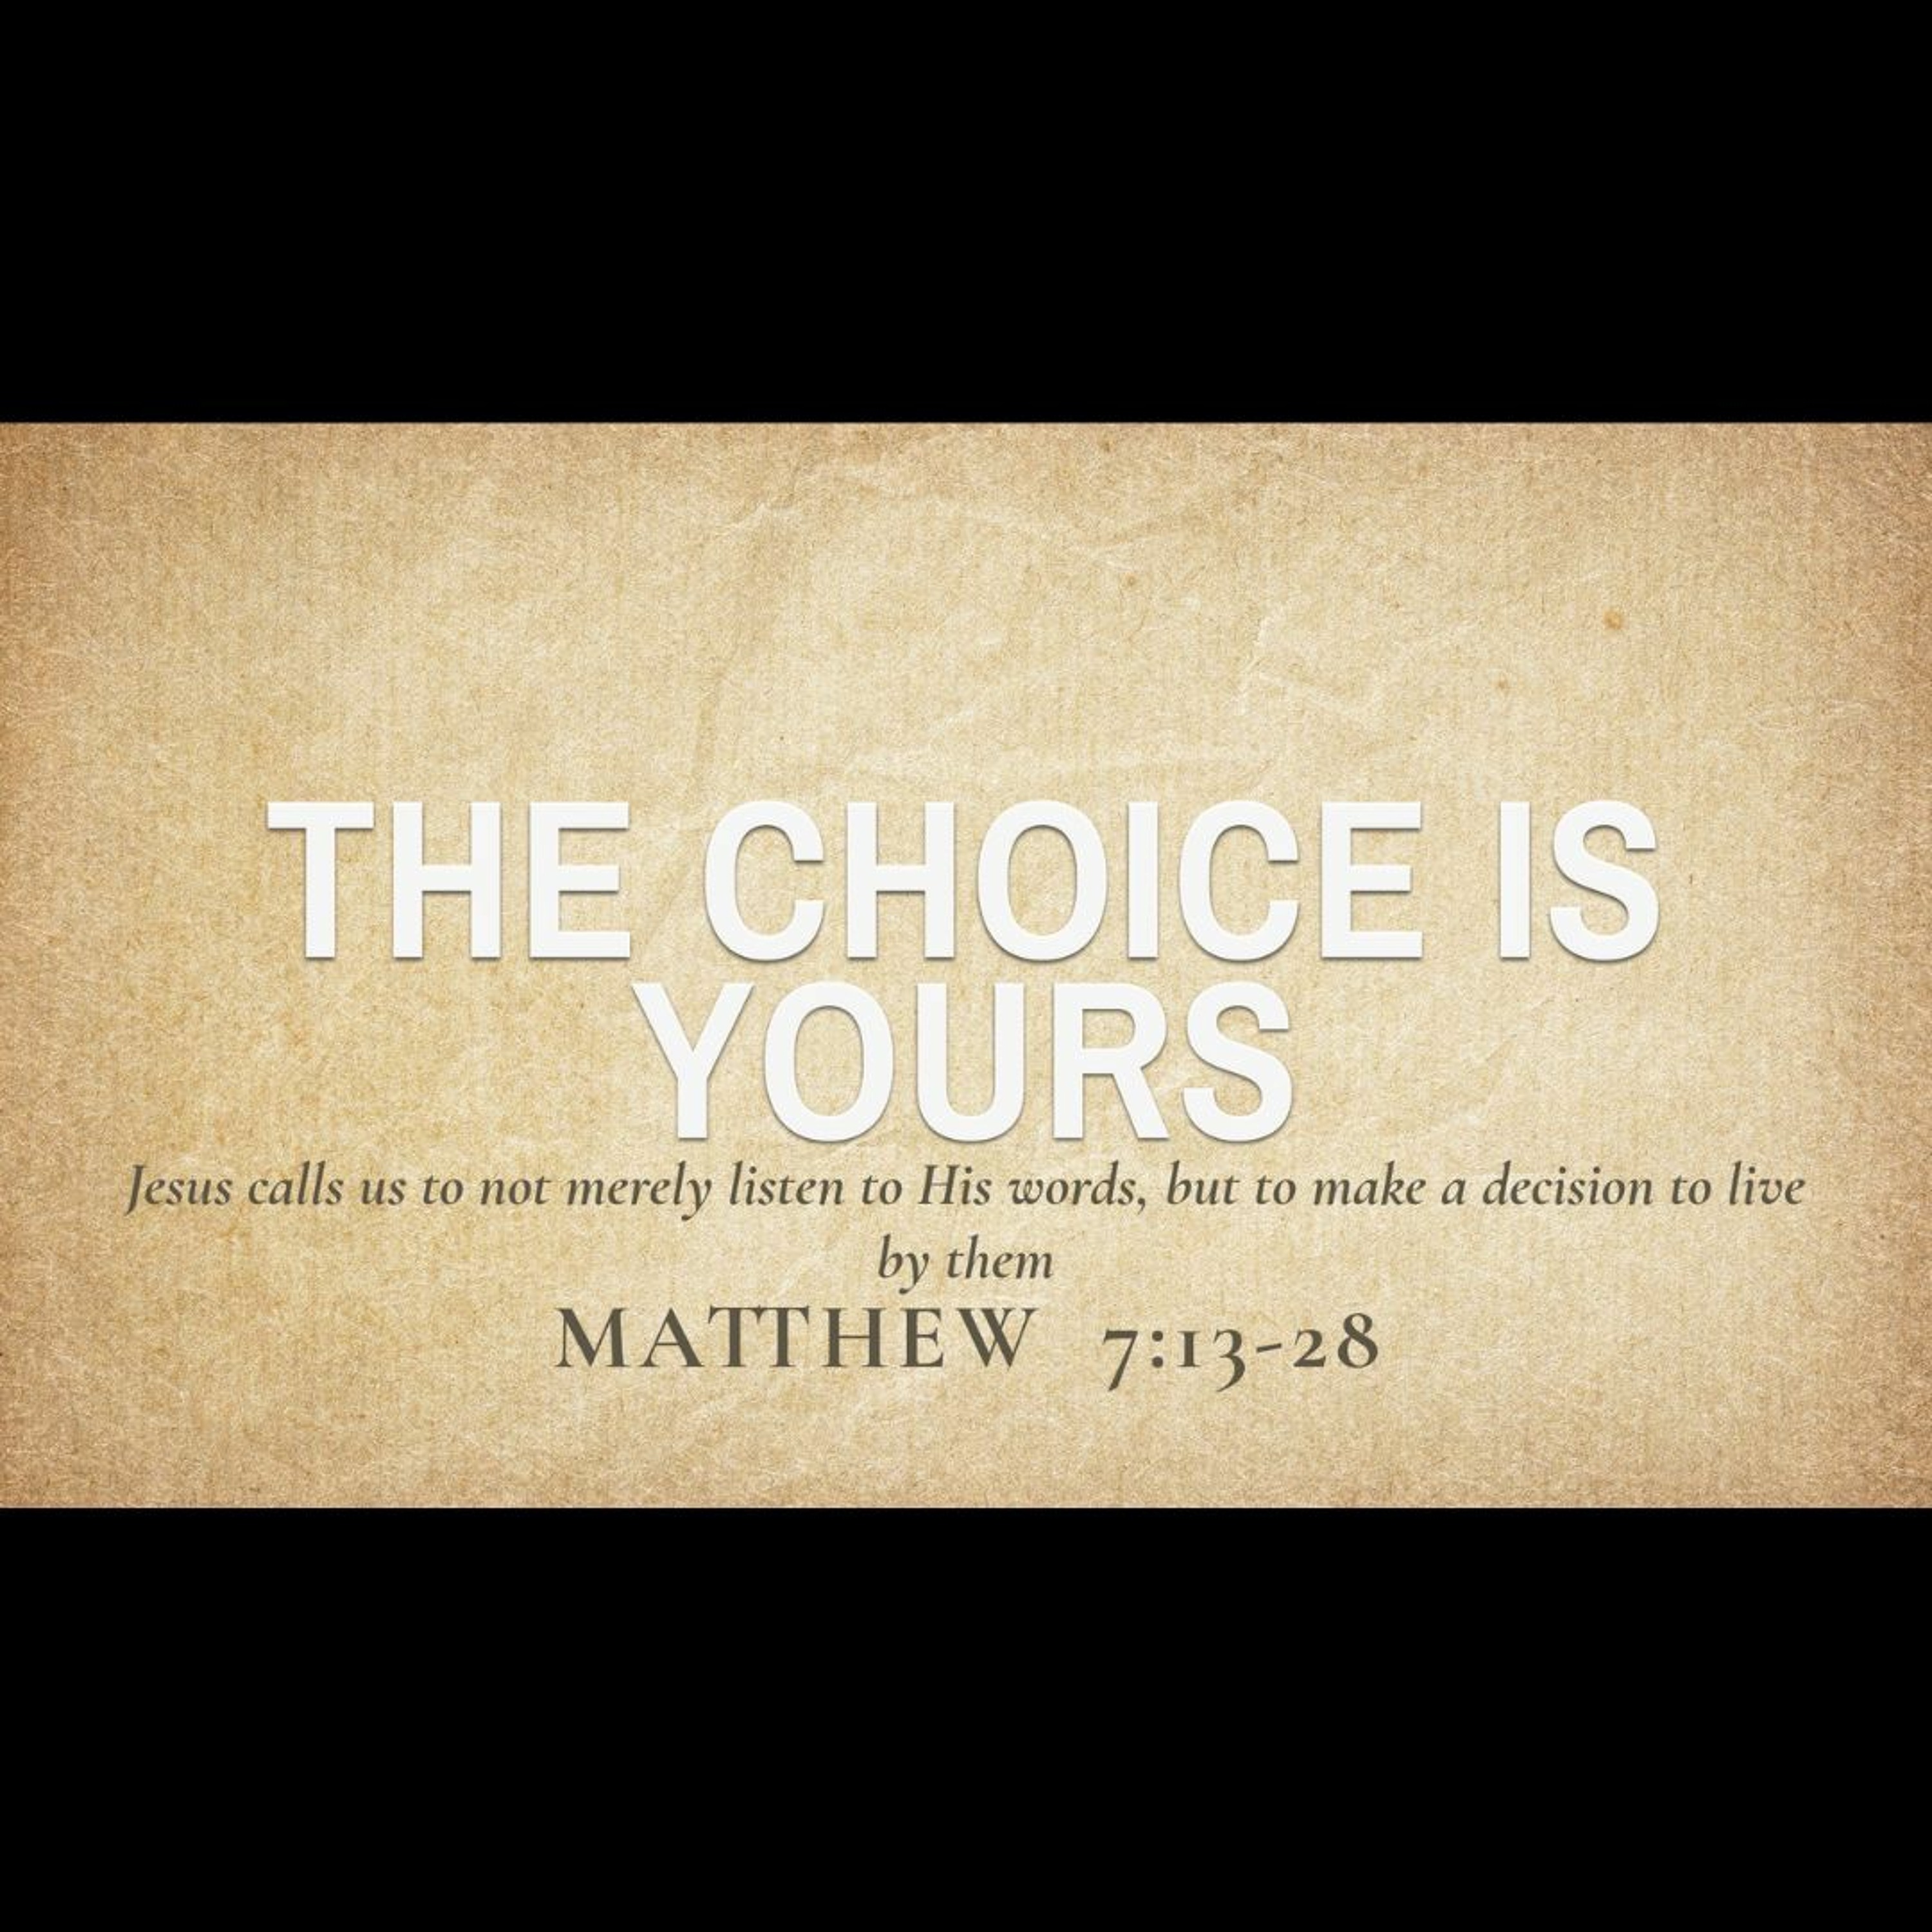 The Choice is Yours (Matthew 7:13-28)